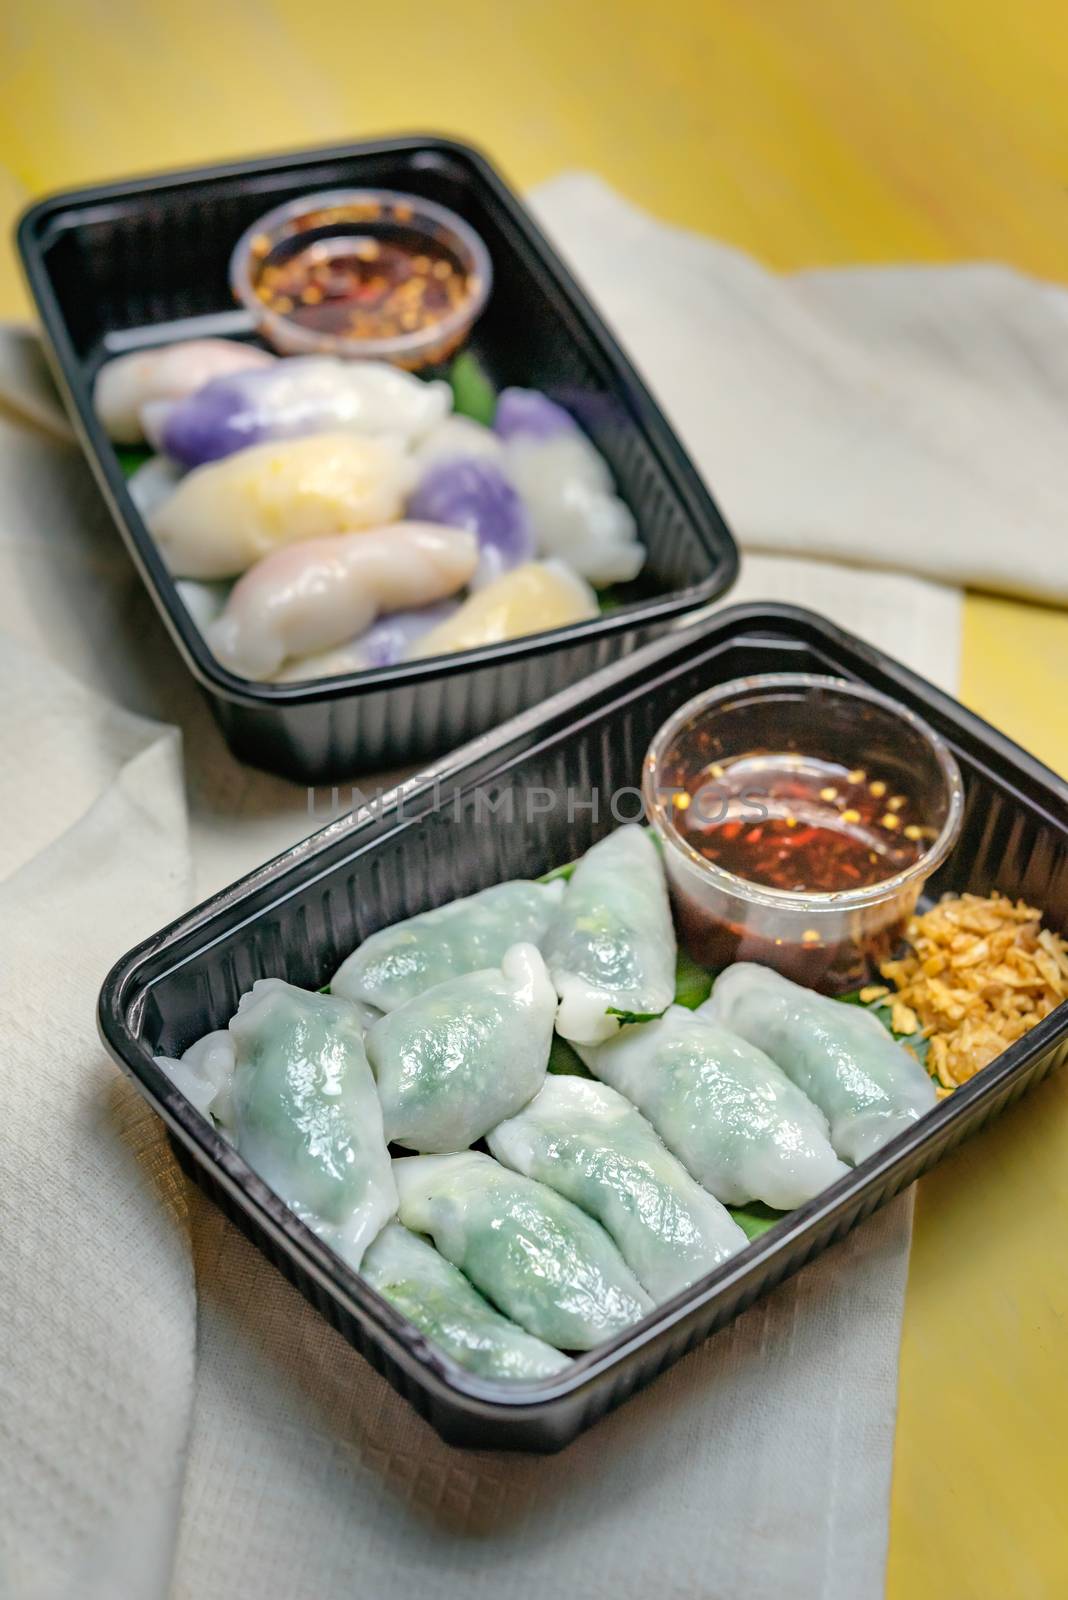 steamed chives dumplings served with spicy chili sauce , asian style cuisine